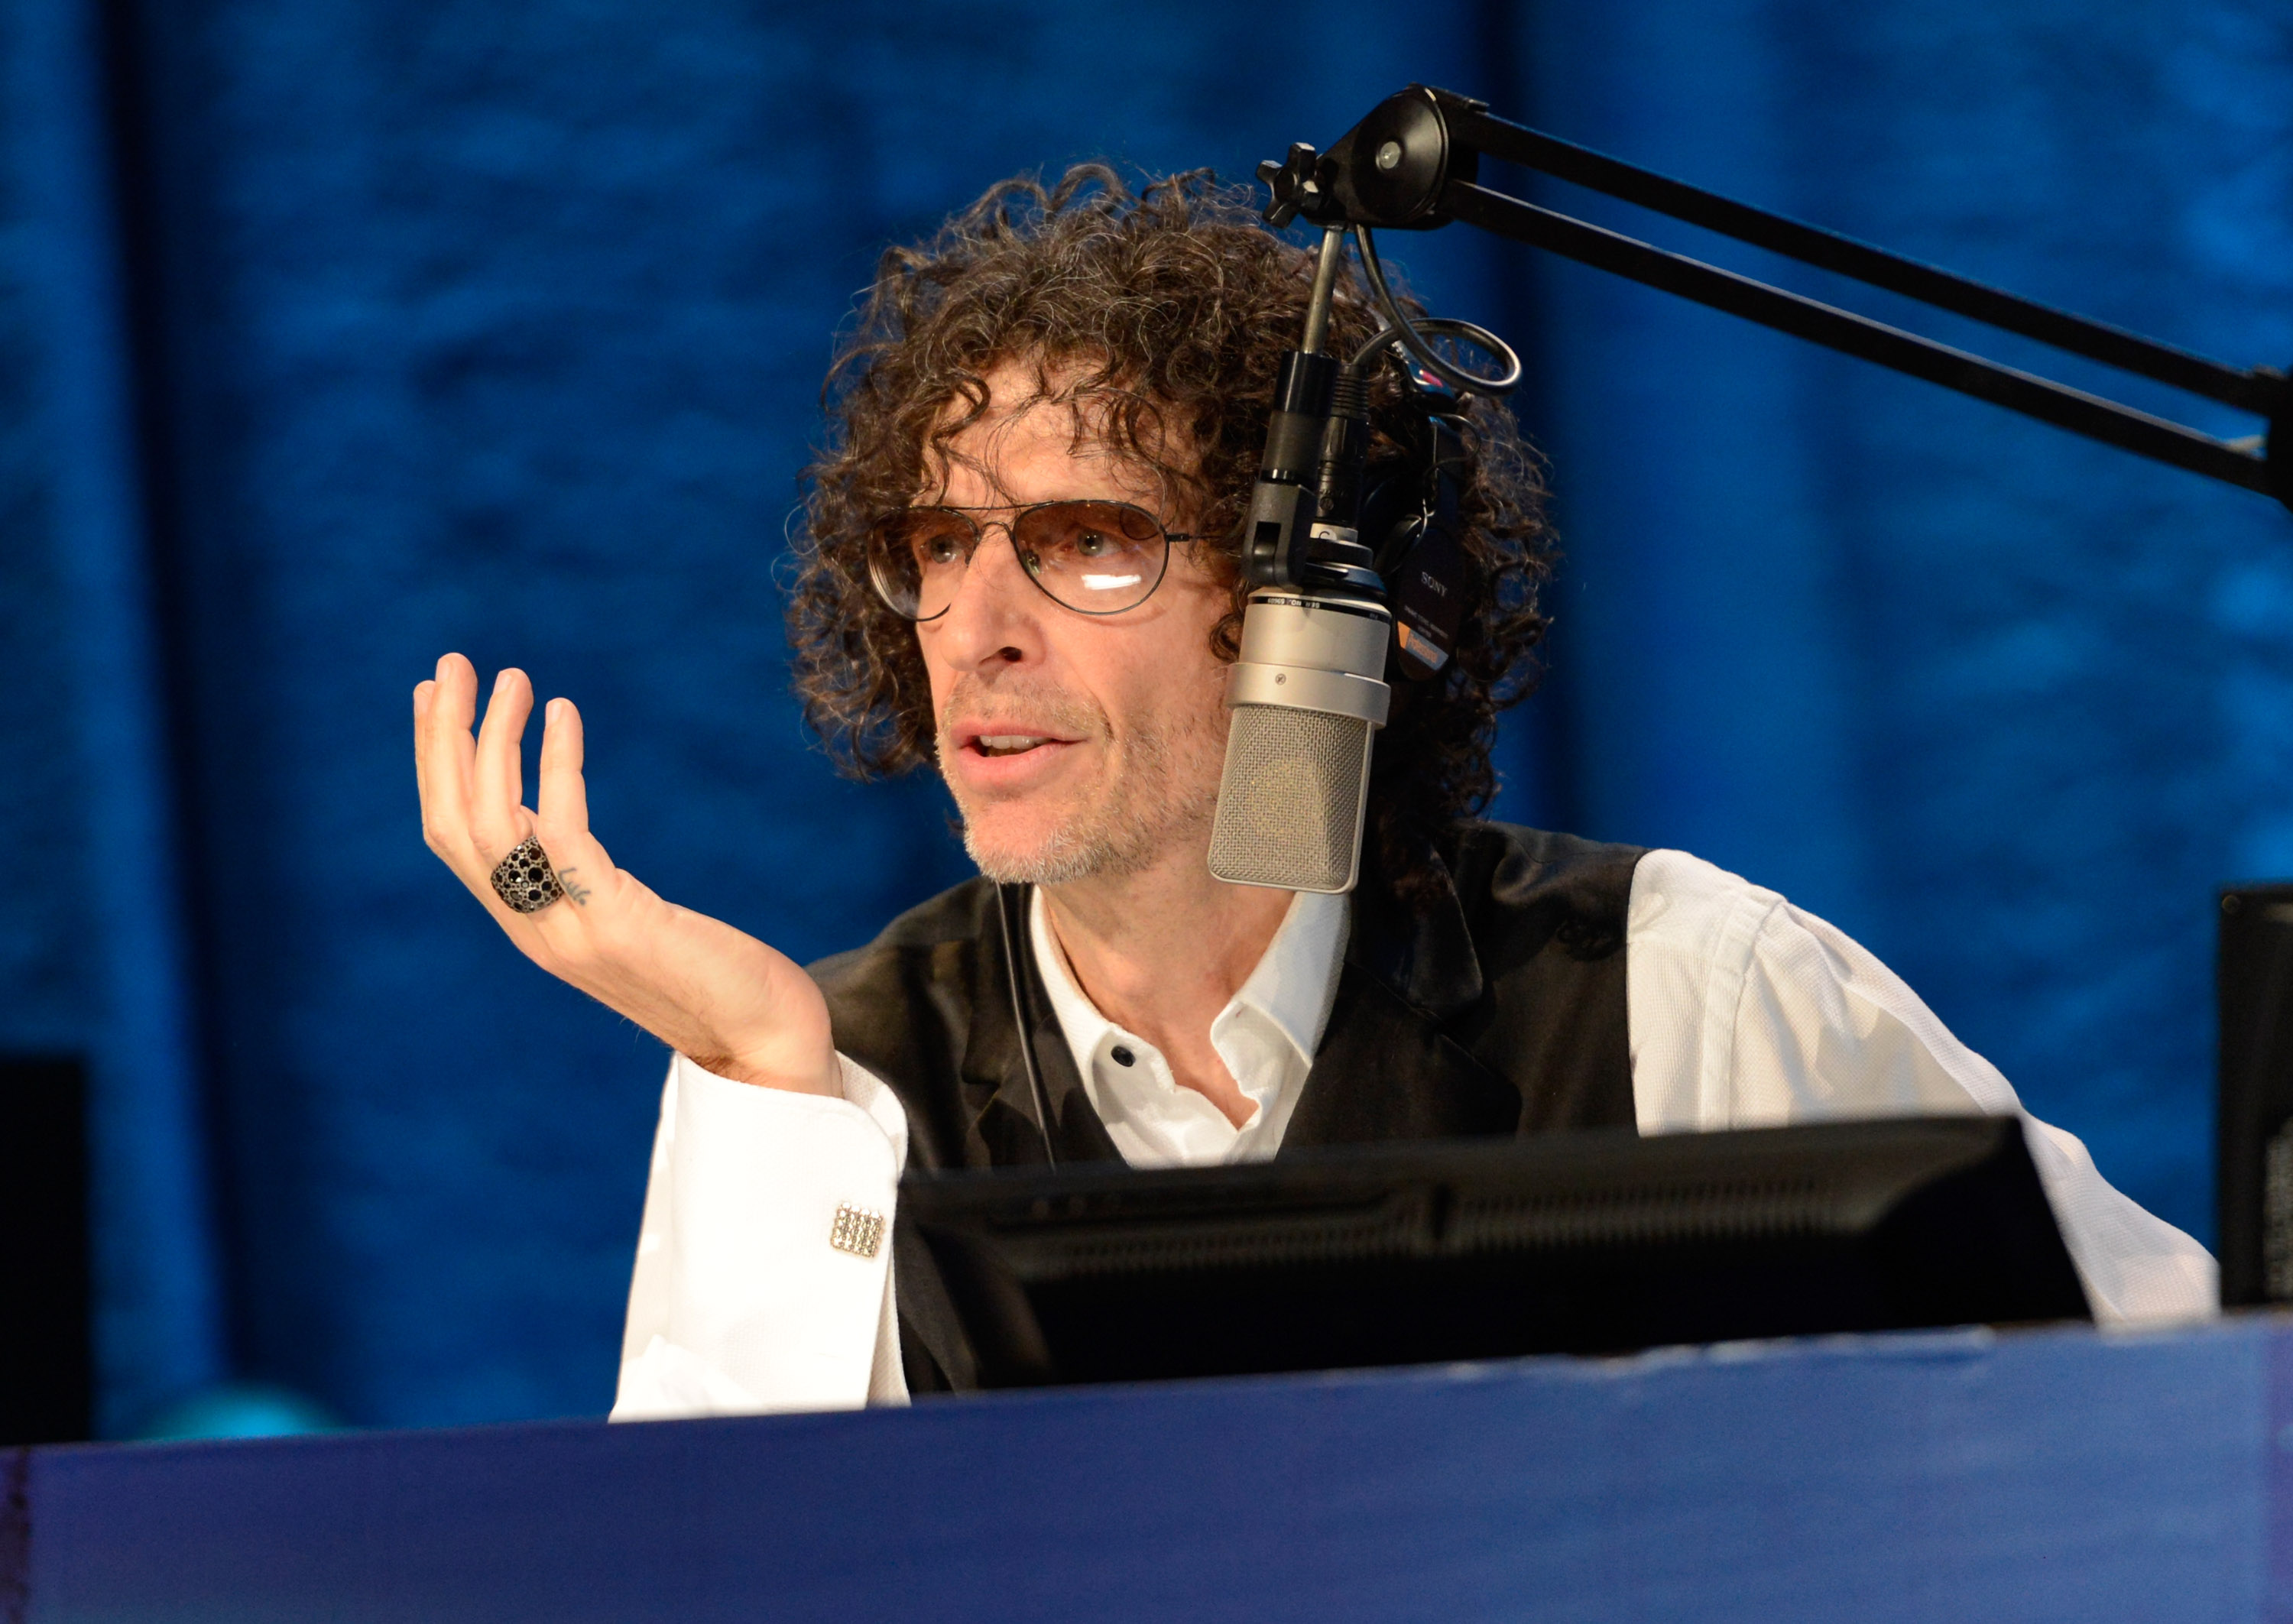 Just go to your doctor," Howard Stern said on Tuesday. 